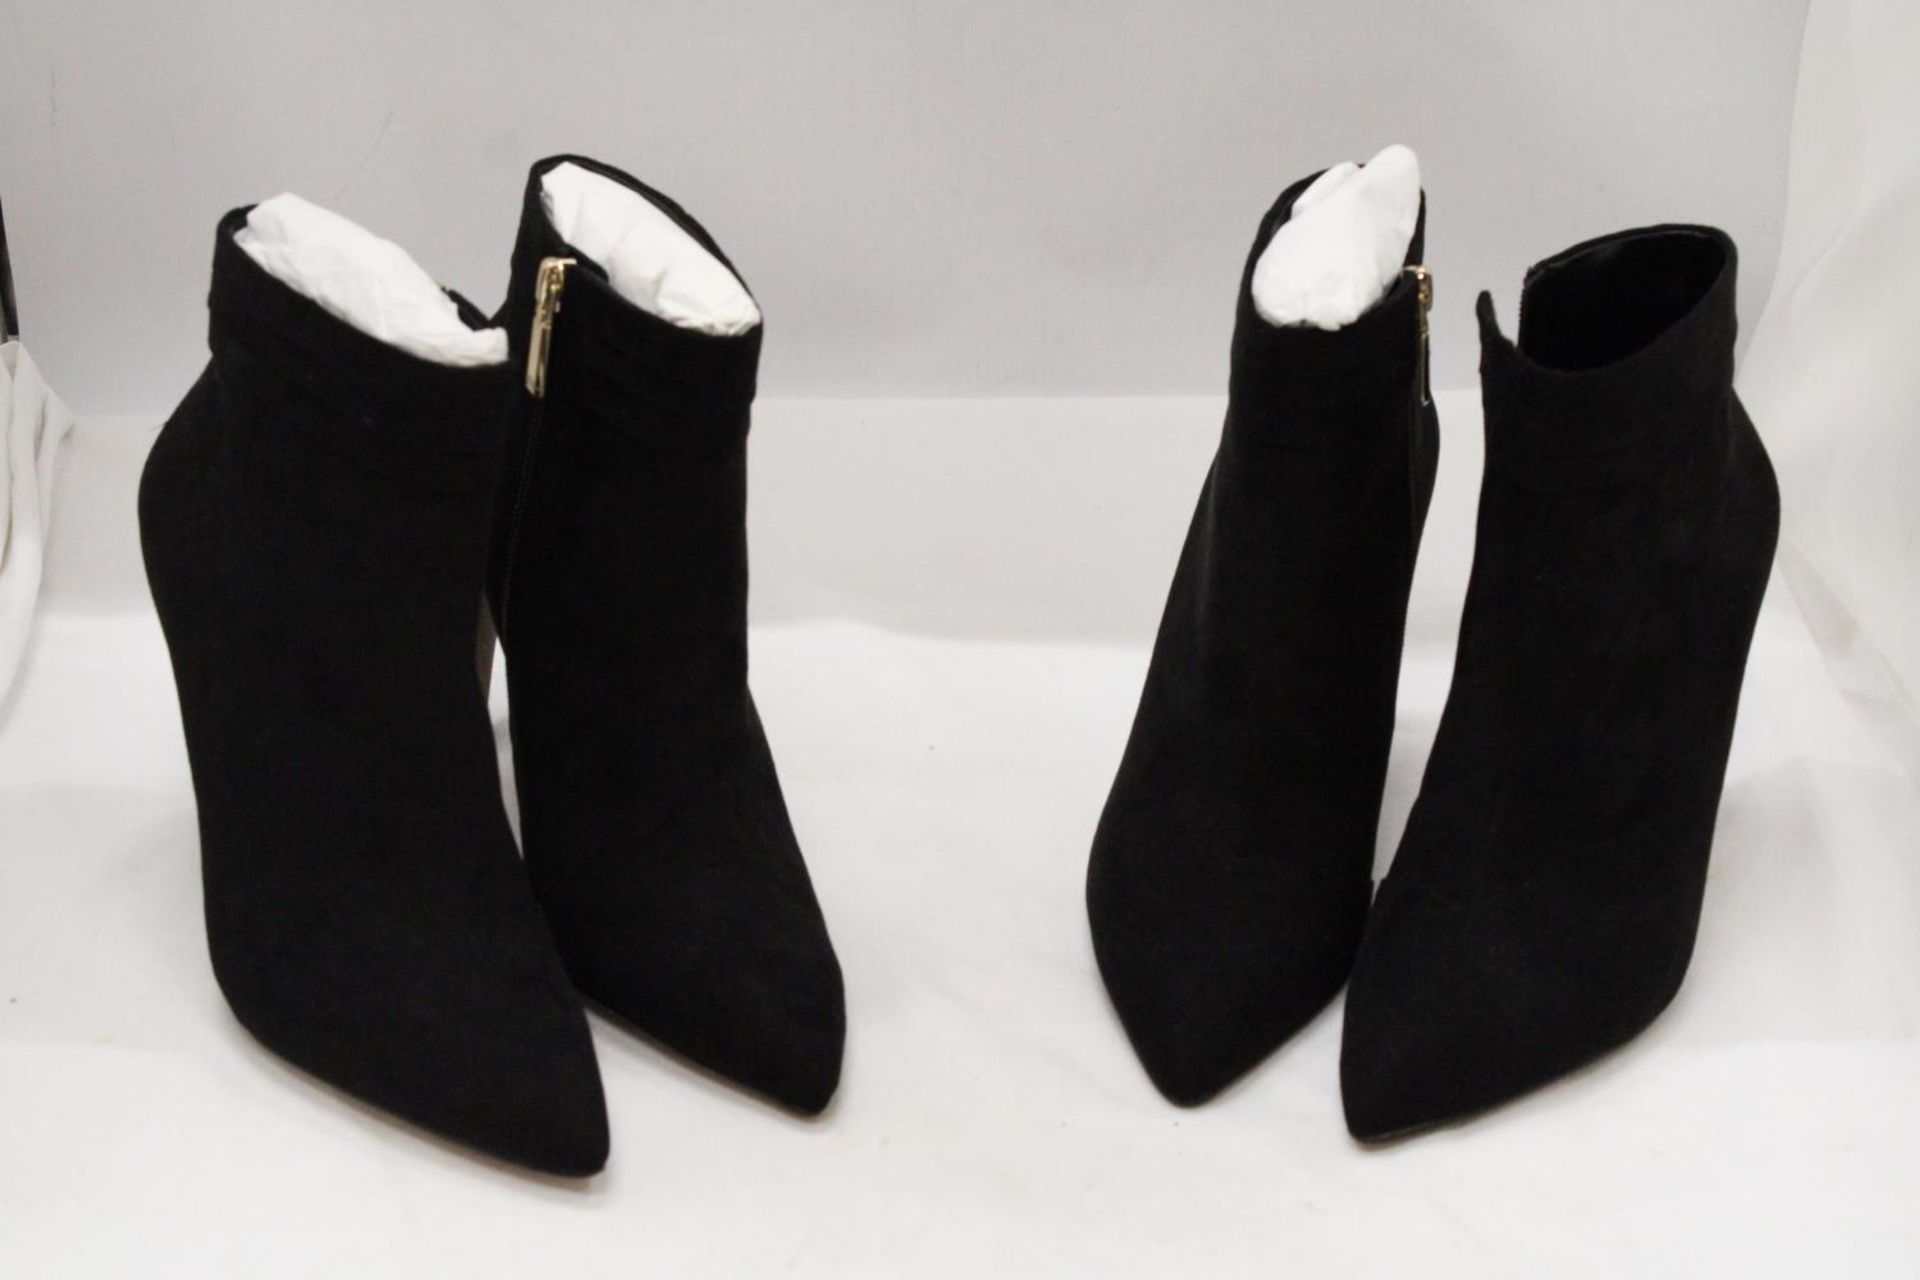 TWO PAIRS OF BOXED "KAREN MILLEN" BLACK HEELED BOOTS - BOTH SIZE 38